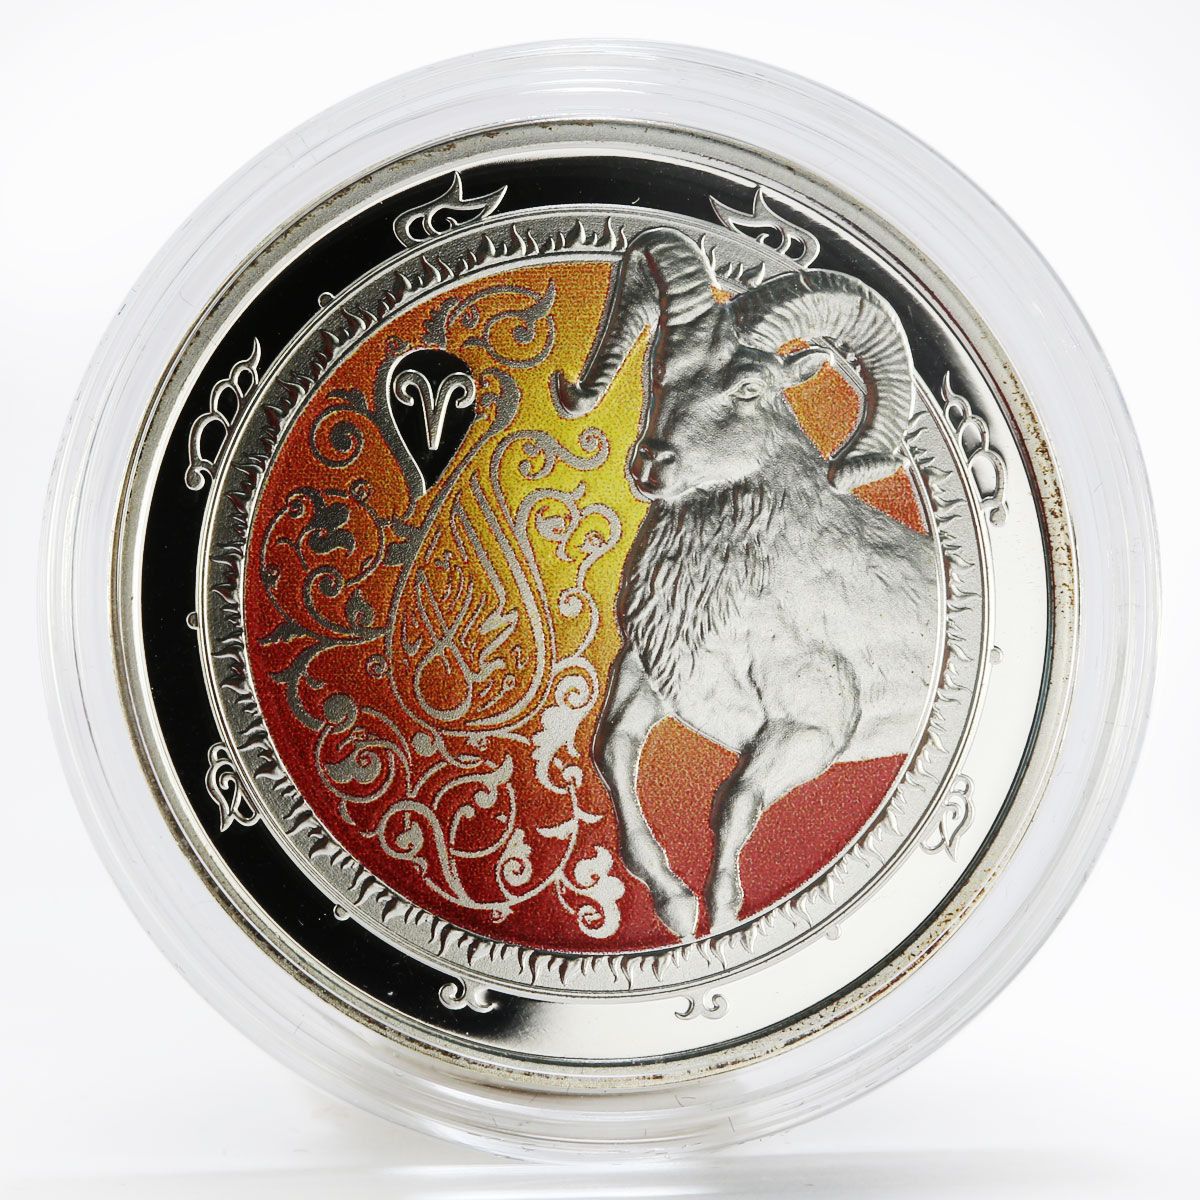 Lebanon 5 livres Zodiac Signs Aries colored proof silver coin 2013